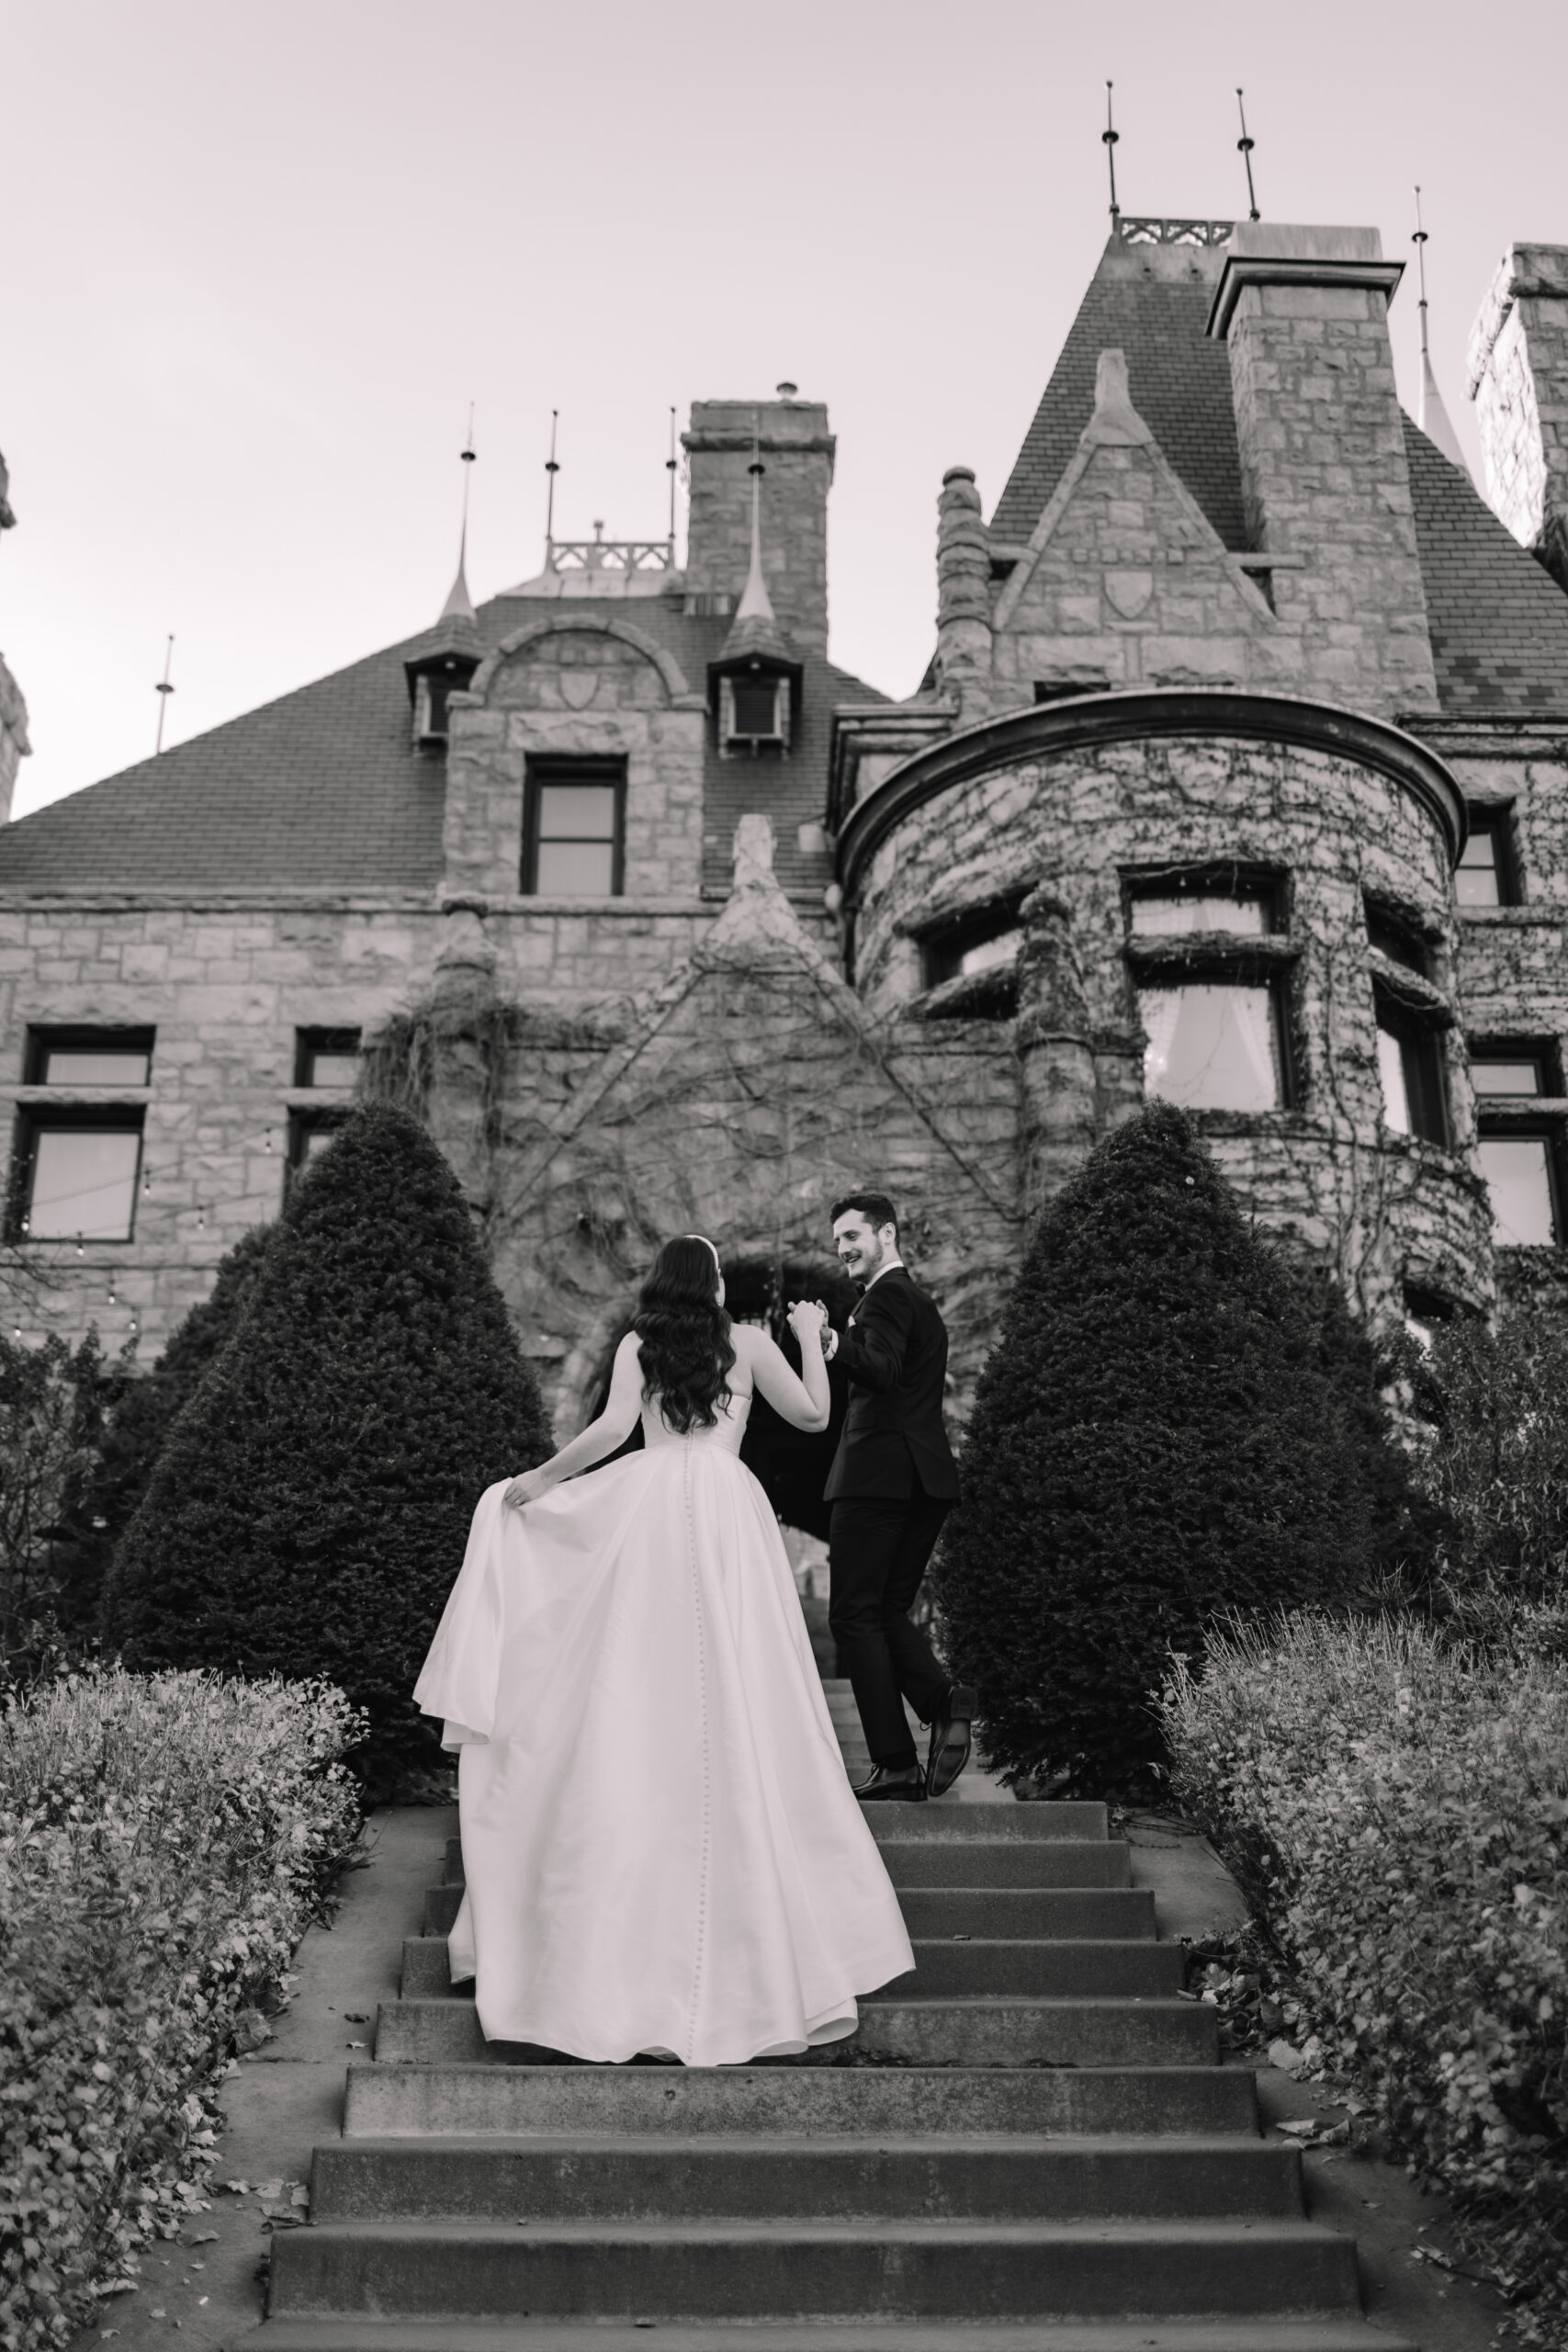 Groom leading his bride up the stairs to a beautiful castle wedding venue located in Minneapolis, Minnesota